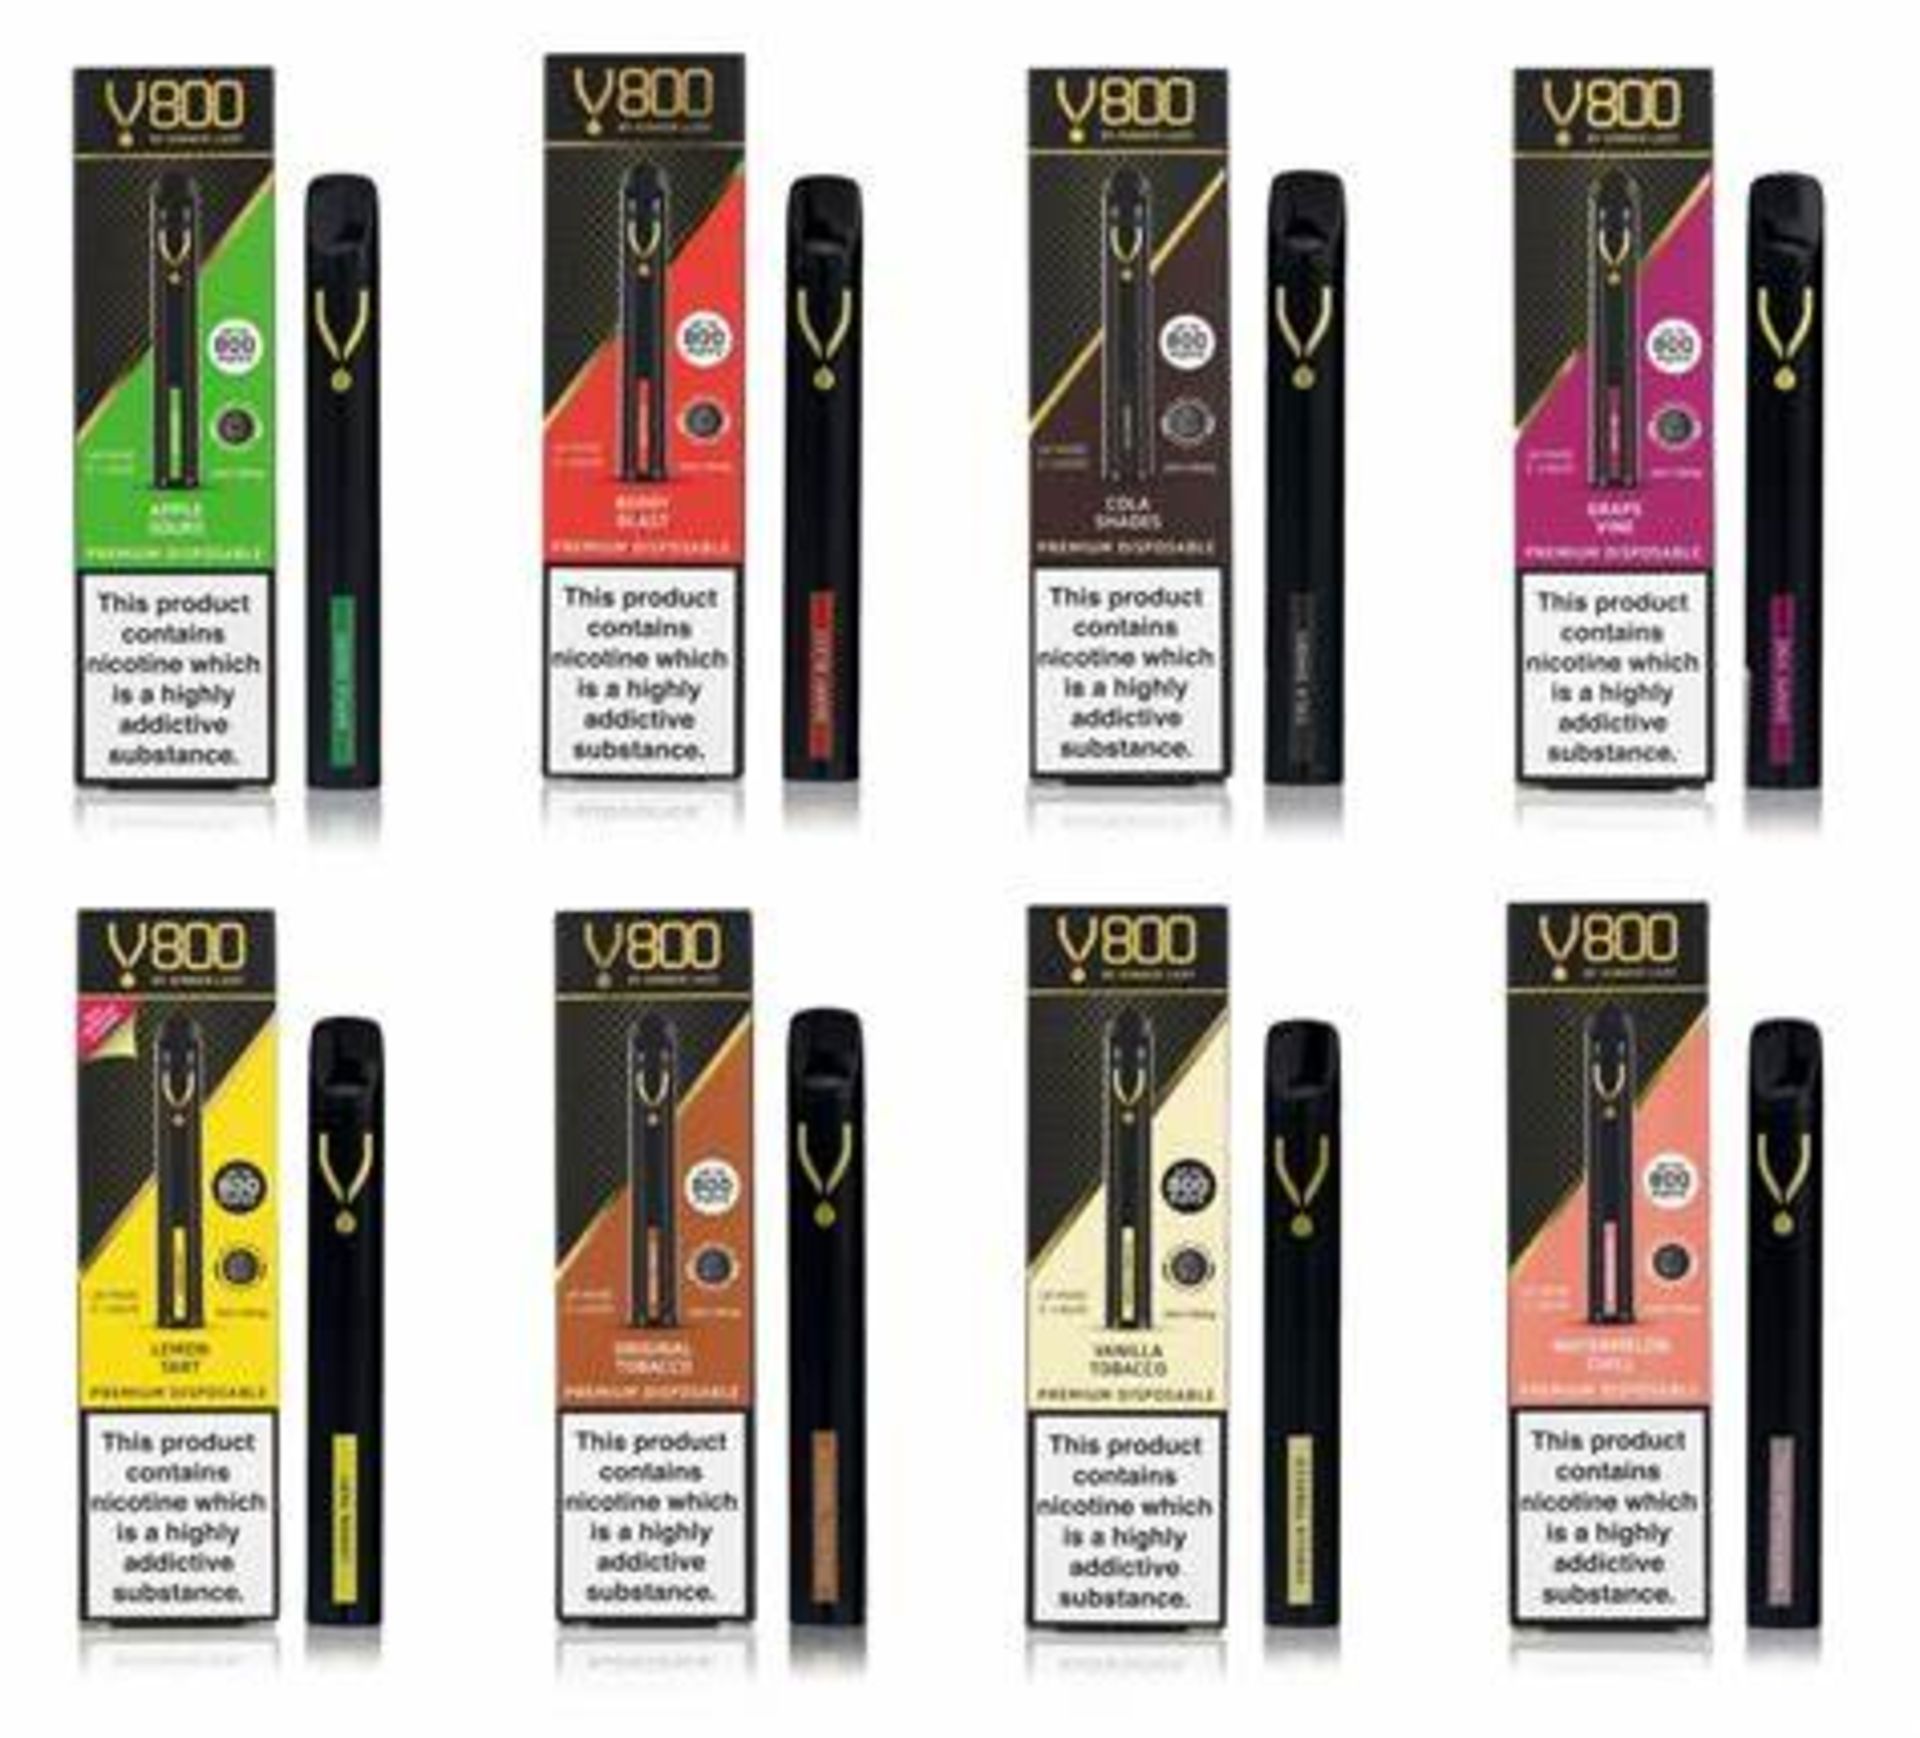 JOB LOT OF 2440 DINNER LADY DISPOSABLE VAPES - RRP APPROX £14,600 - SEE DESCRIPTION FOR FLAVOURS